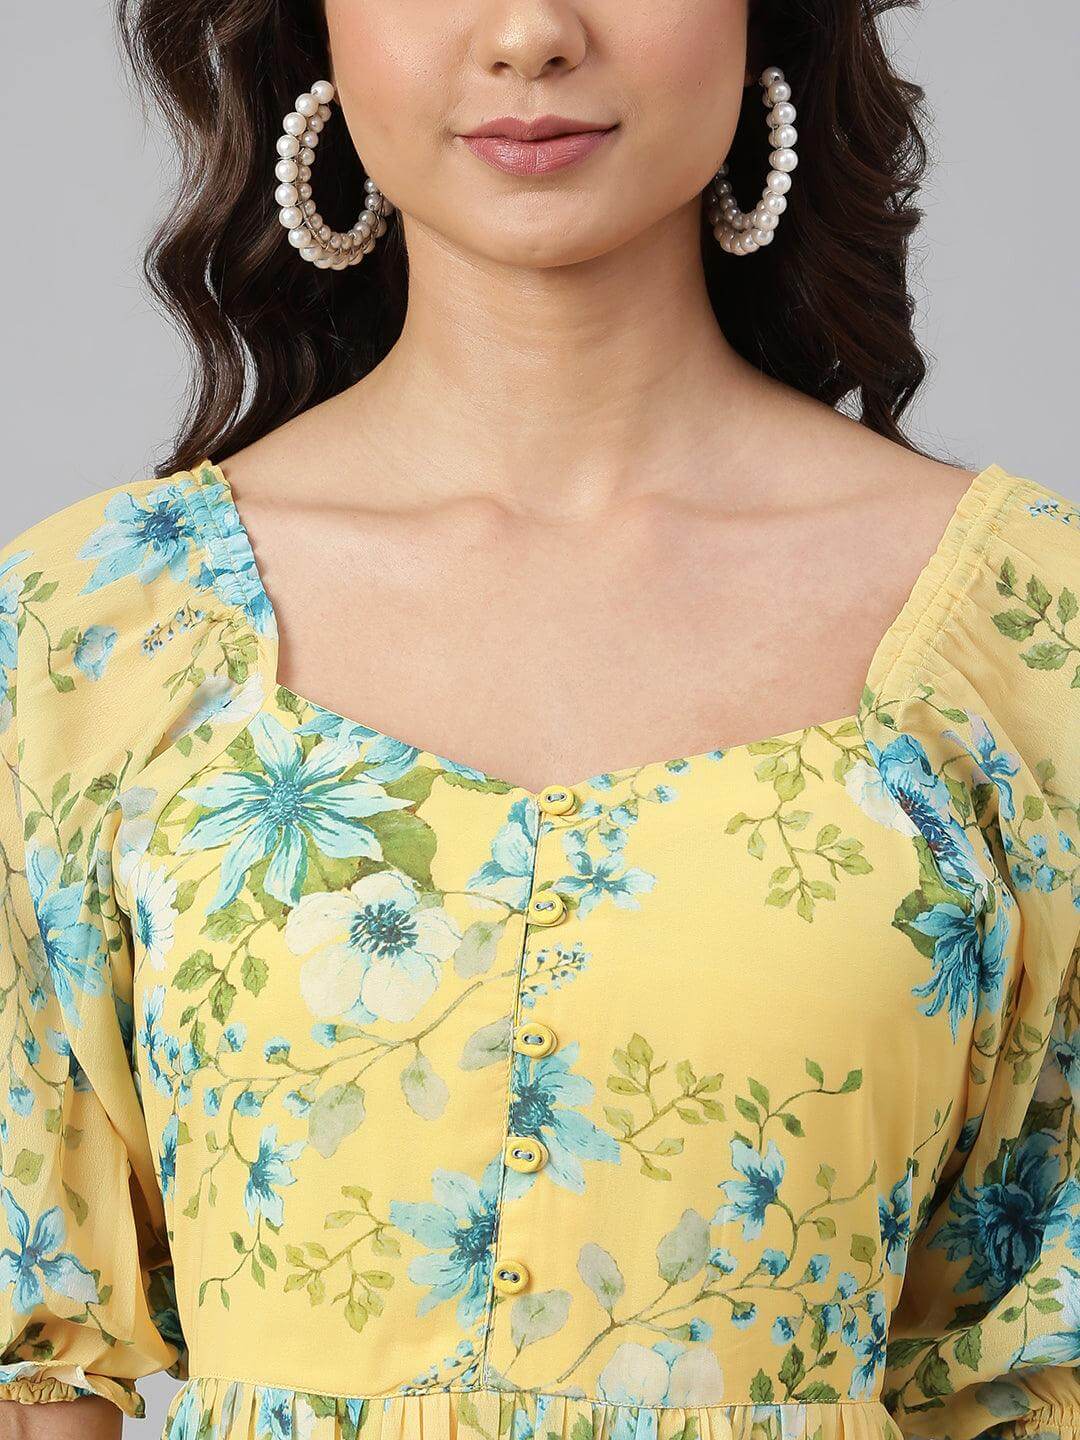 Yellow Georgette Floral Print Flared Western Dress